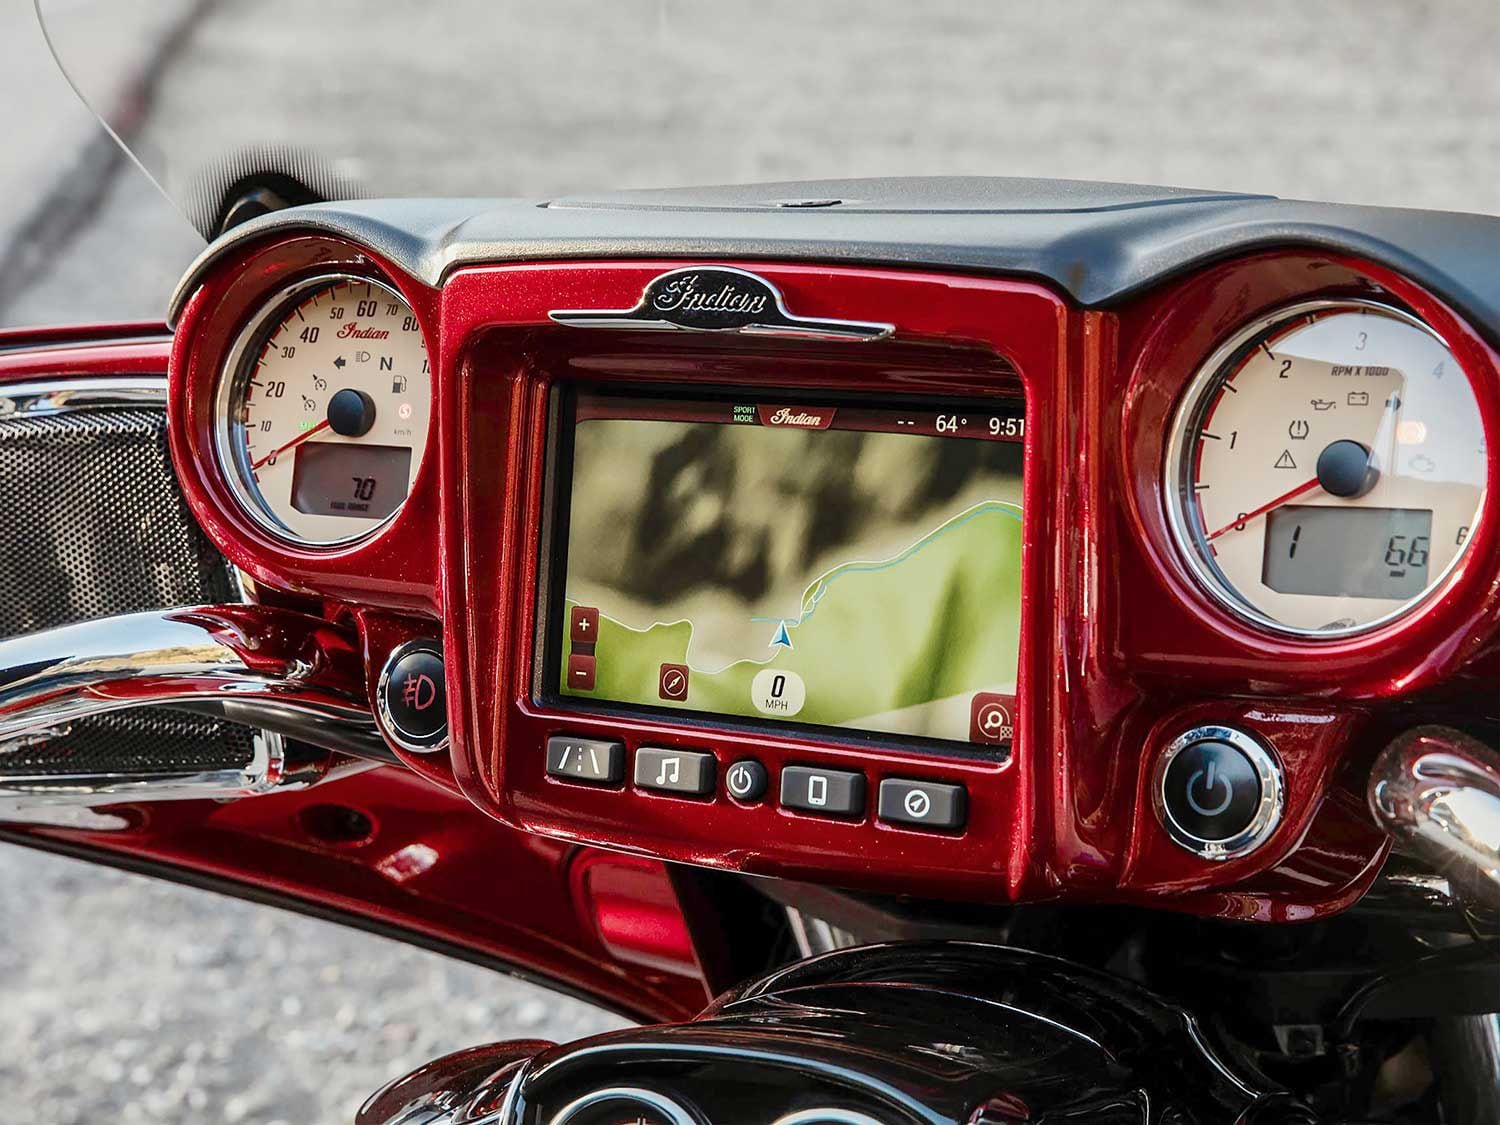 Touchscreen infotainment system with nav, customizable screens, and Bluetooth compatibility.